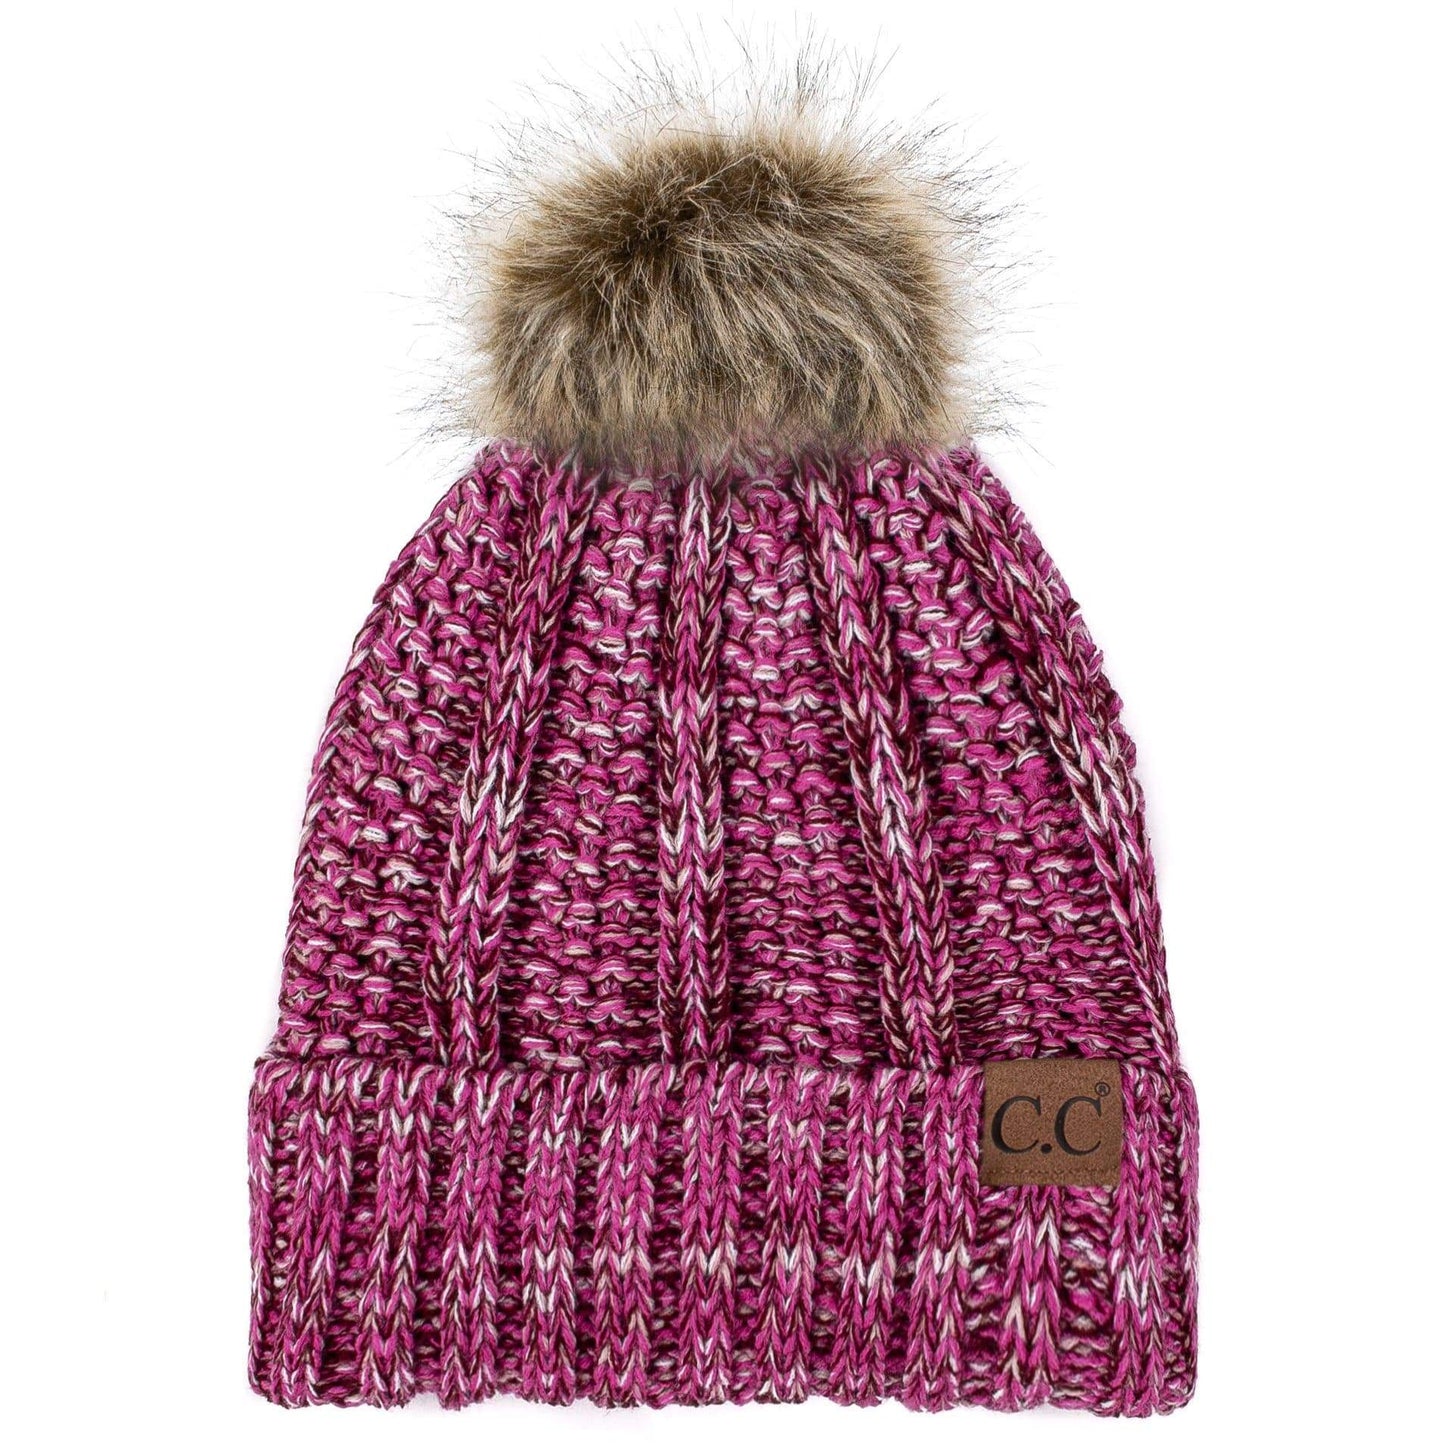 C.C Apparel C.C YJ820 - Thick Cable Knit Hat Faux Fur Pom Pom Fleece Lined Mixed Skull Cap Cuff Beanie